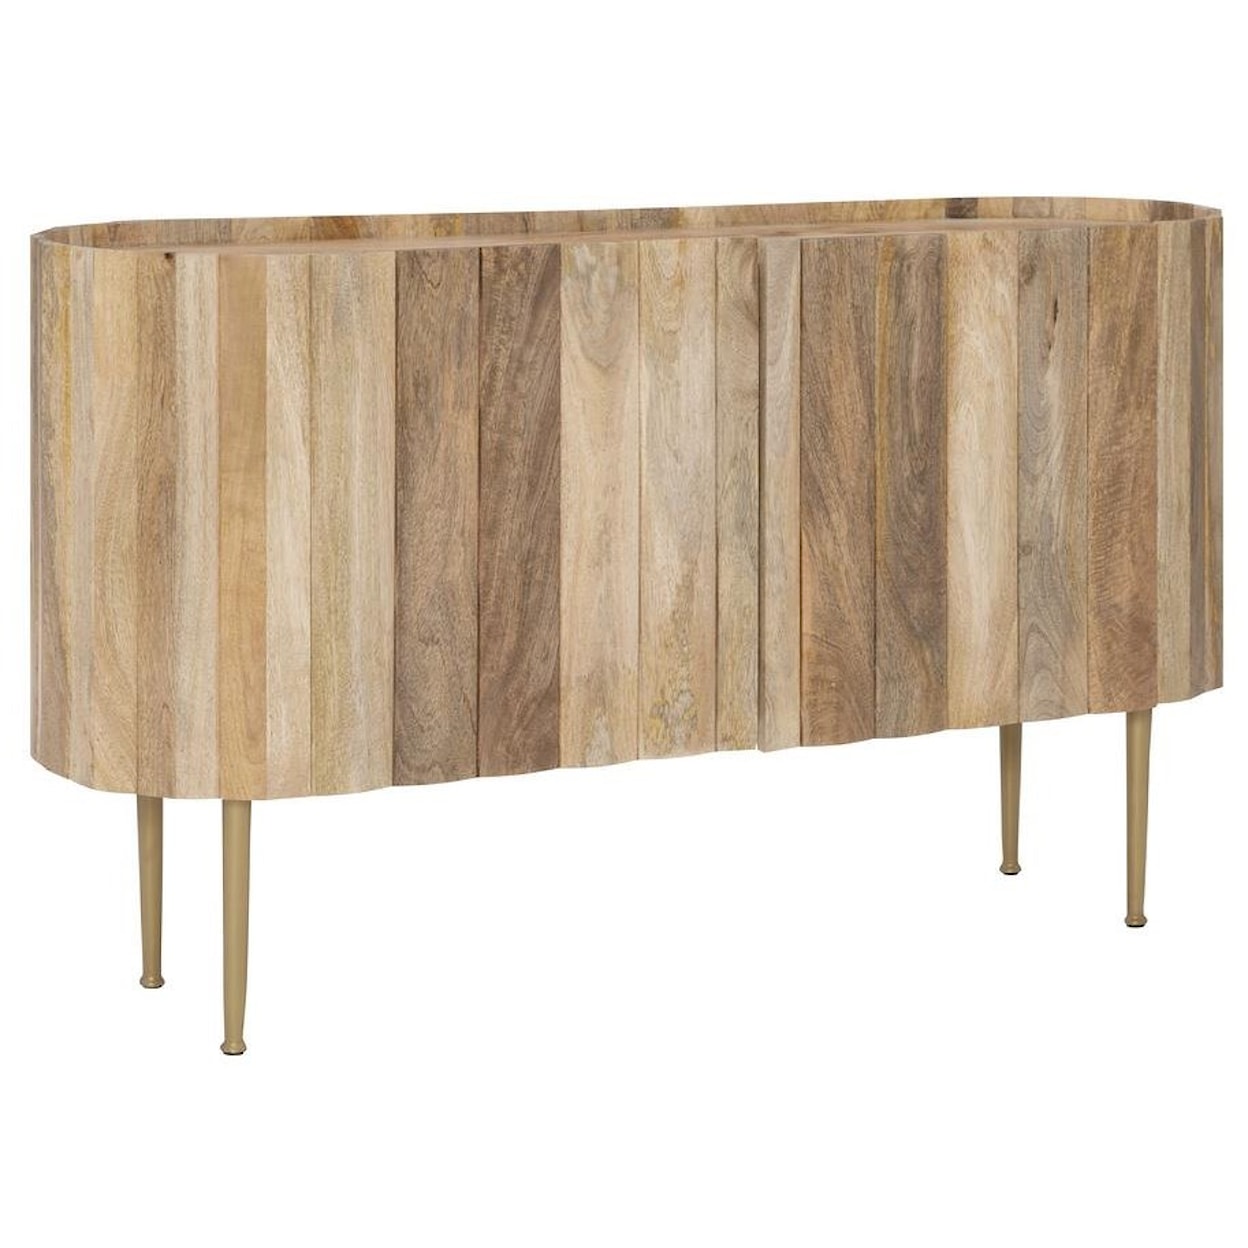 LaHave Furniture Chana Natural 2 Door Console